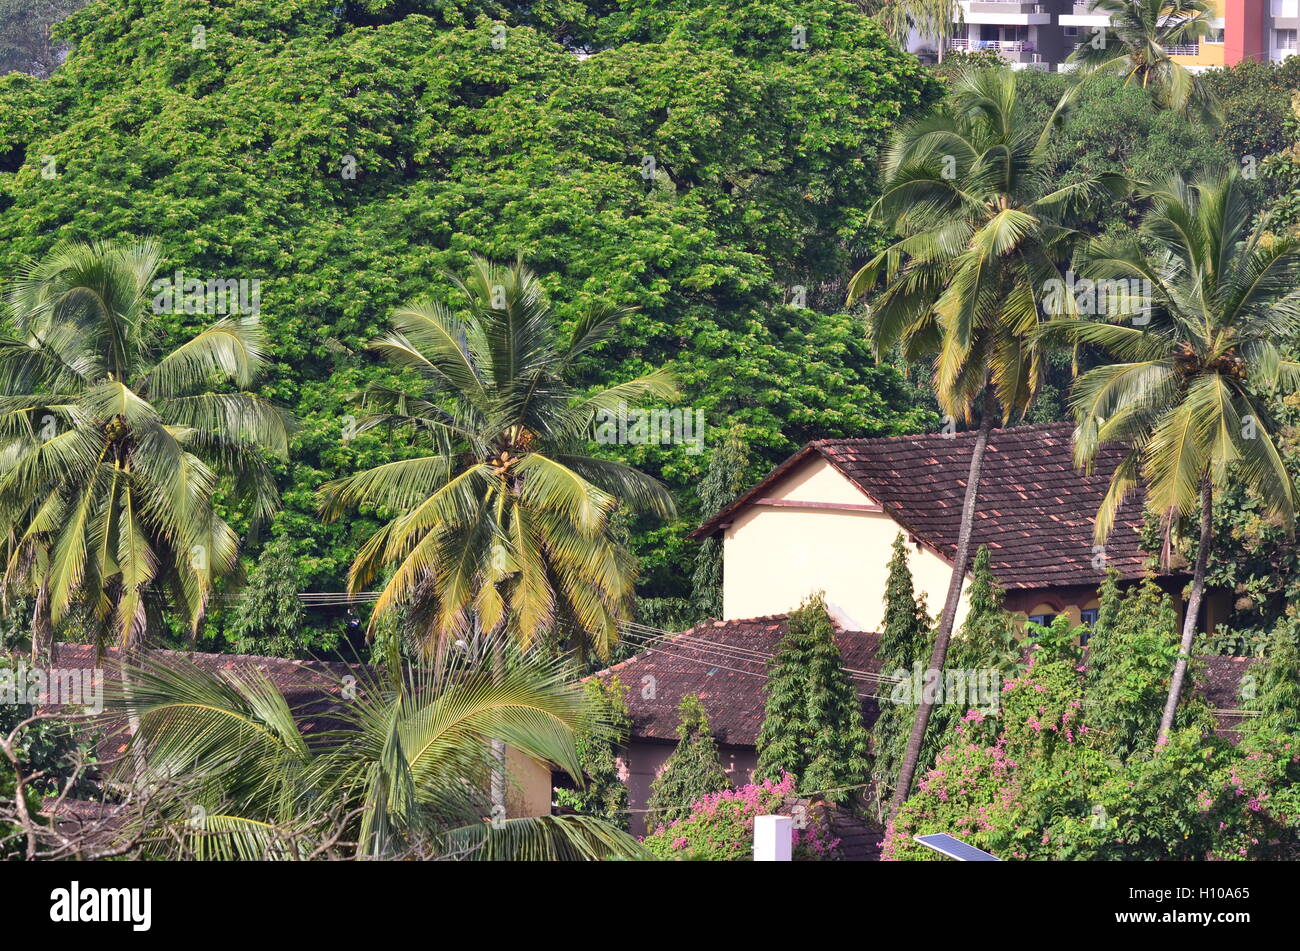 Traditional tile roof house surrounded by greenery of trees and coconut palms at Mangalore, Karnataka, India Stock Photo